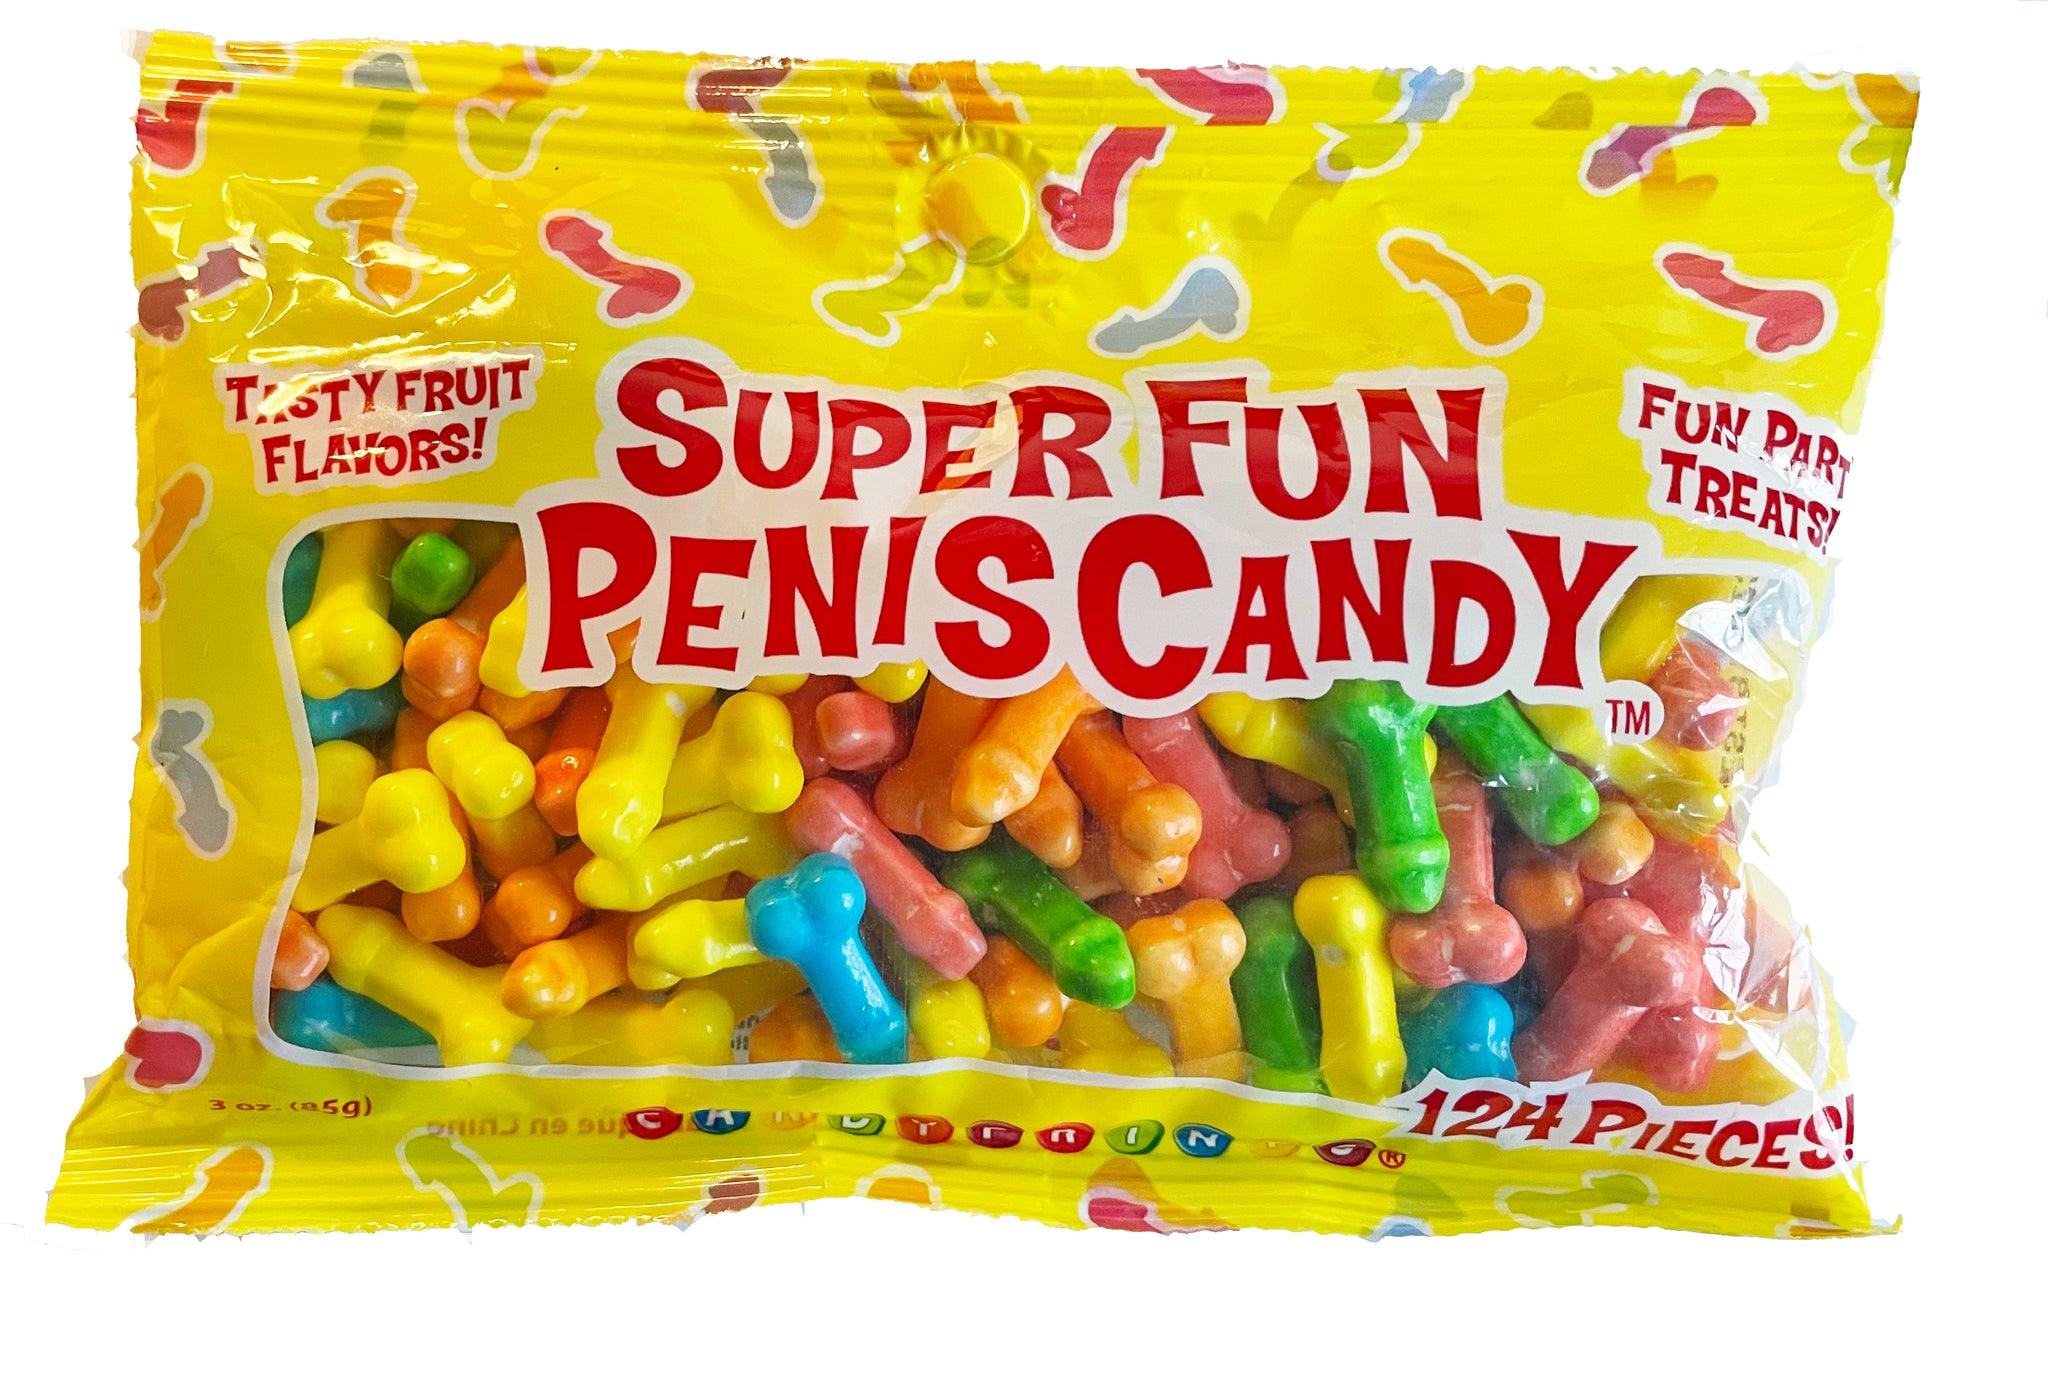 Super Fun Penis Candy – Naughty image